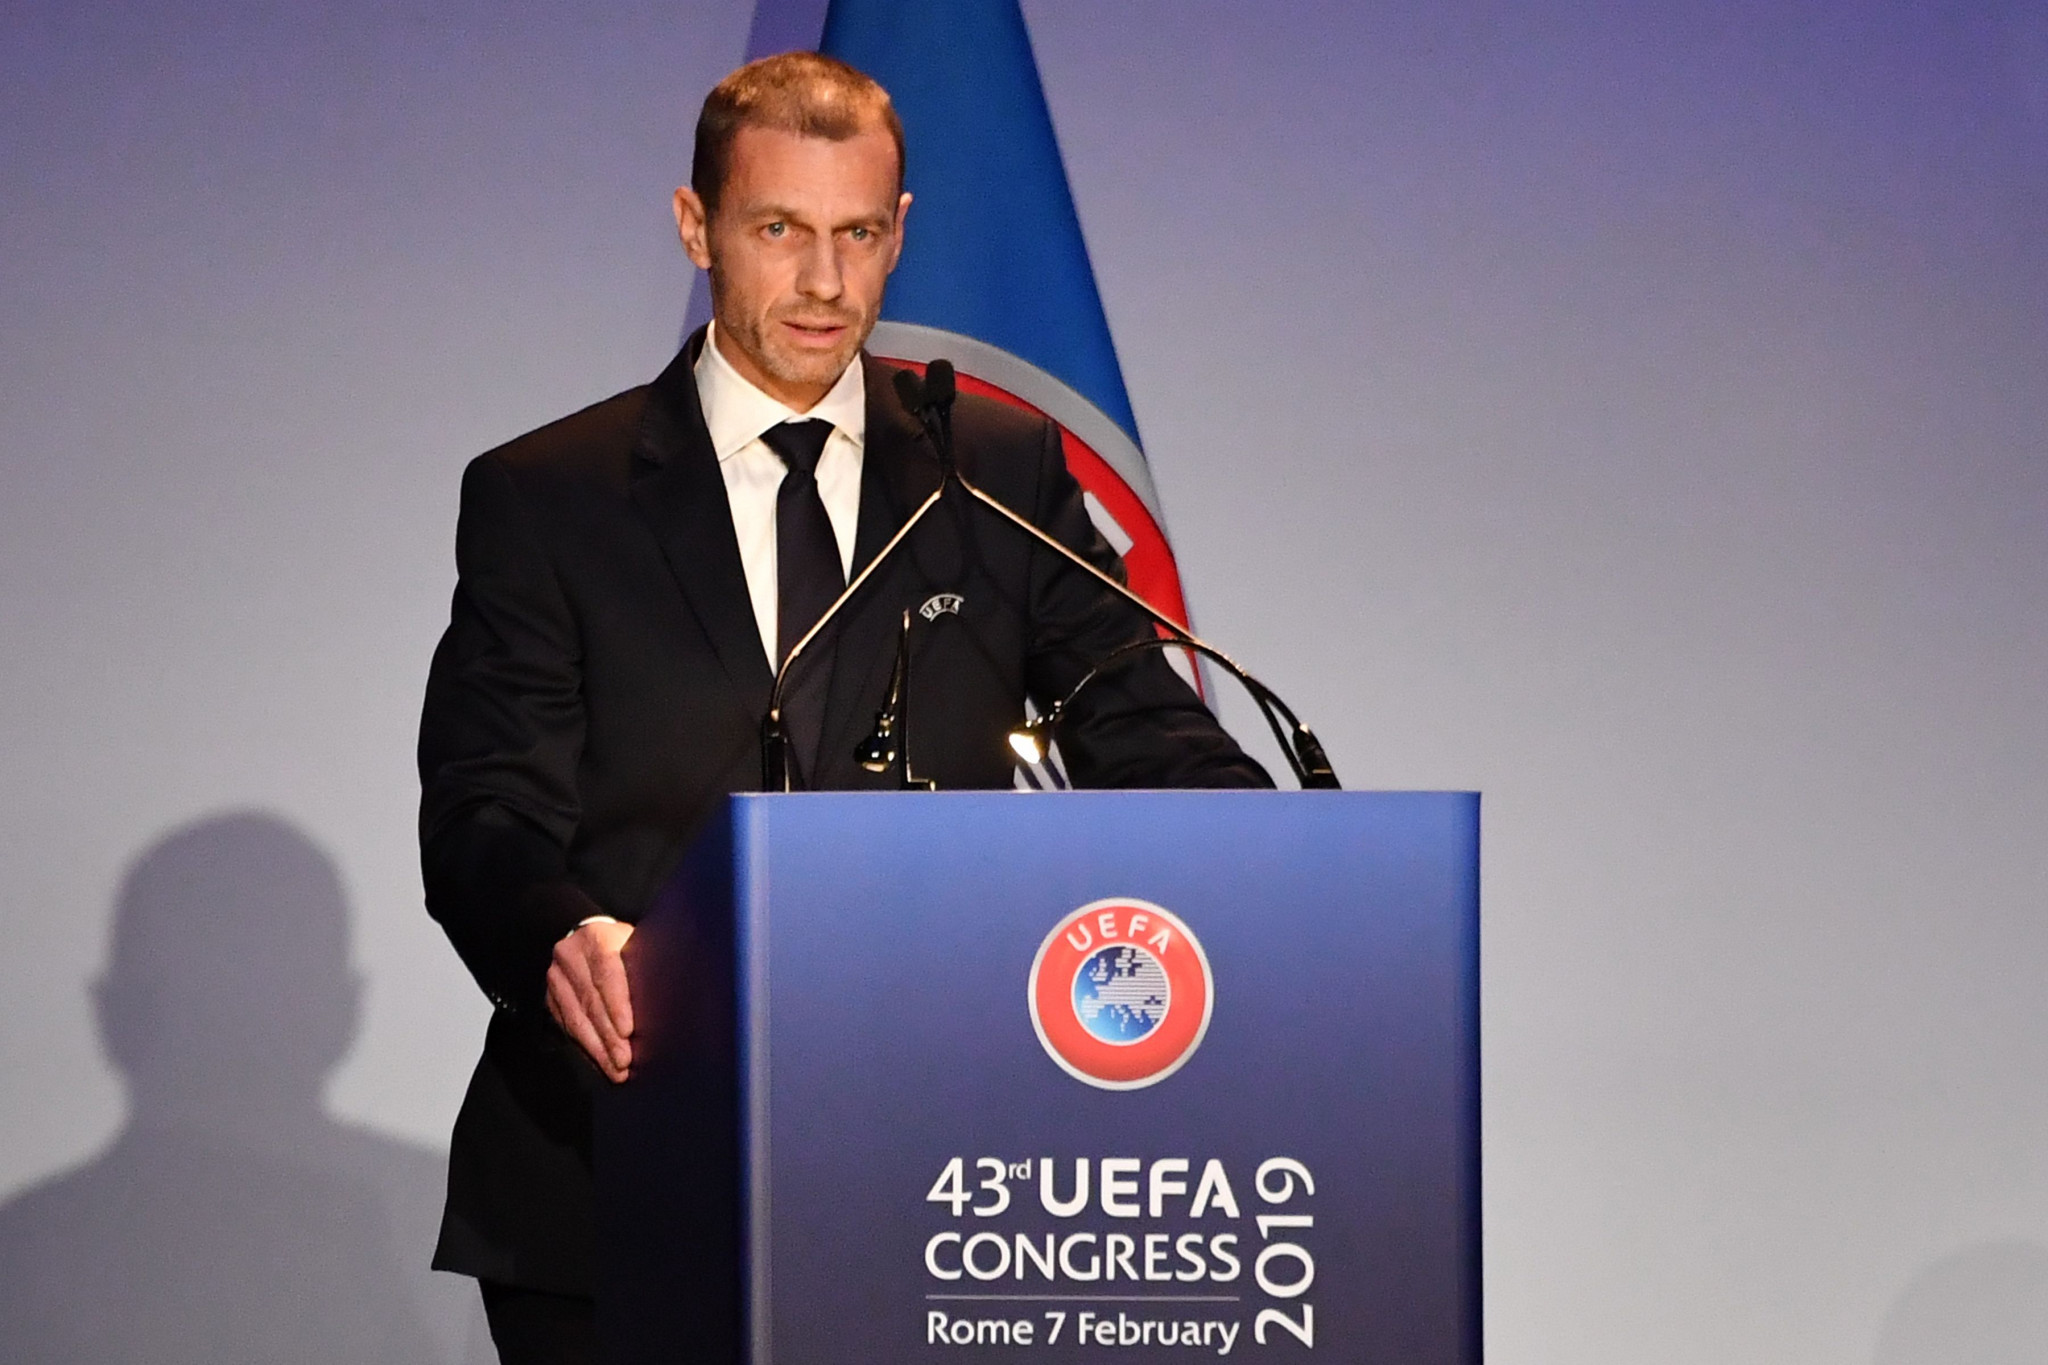 Aleksander Čeferin has been re-elected as President of UEFA at the organisation's Congress today in Rome ©Getty Images